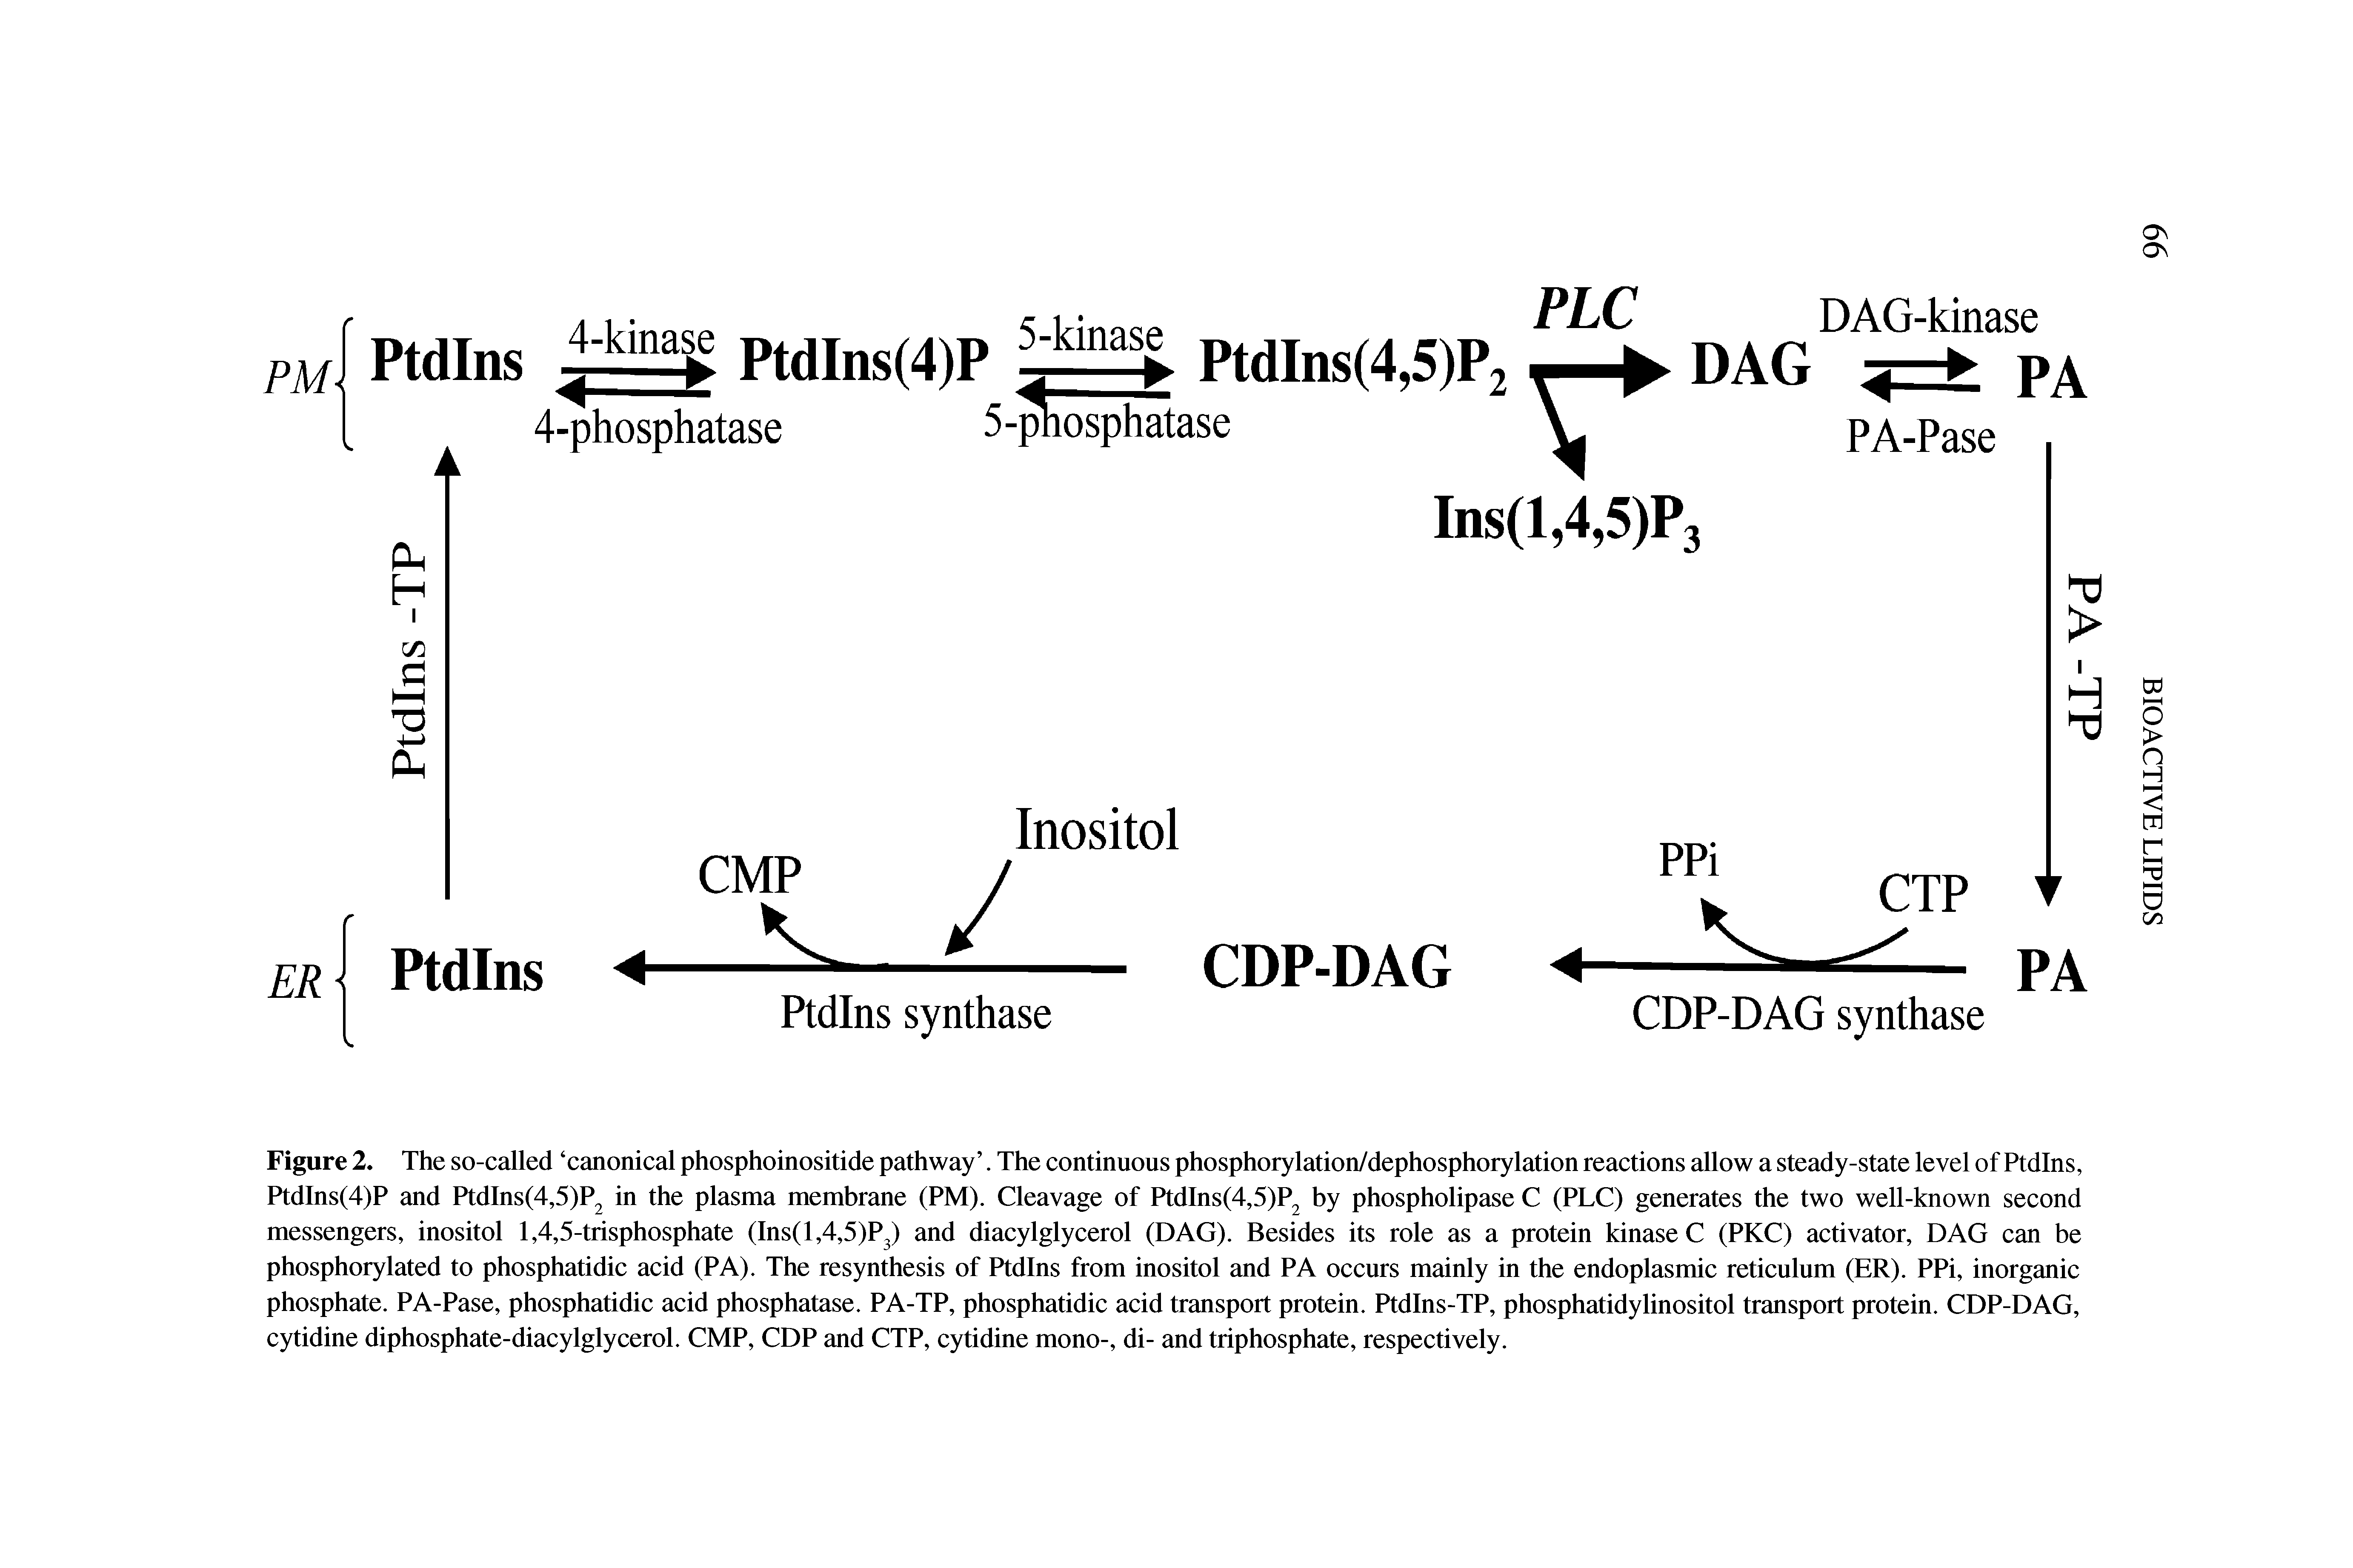 Figure 2. The so-called canonical phosphoinositide pathway . The continuous phosphorylation/dephosphorylation reactions allow a steady-state level of Ptdins, PtdIns(4)P and PtdIns(4,5)P2 in the plasma membrane (PM). Cleavage of PtdIns(4,5)P2 by phospholipase C (PLC) generates the two well-known second messengers, inositol 1,4,5-trisphosphate (Ins(l,4,5)P3) and diacylglycerol (DAG). Besides its role as a protein kinase C (PKC) activator, DAG can be phosphorylated to phosphatidic acid (PA). The resynthesis of Ptdins from inositol and PA occurs mainly in the endoplasmic reticulum (ER). PPi, inorganic phosphate. PA-Pase, phosphatidic acid phosphatase. PA-TP, phosphatidic acid transport protein. PtdIns-TP, phosphatidylinositol transport protein. CDP-DAG, cytidine diphosphate-diacylglycerol. CMP, CDP and CTP, cytidine mono-, di- and triphosphate, respectively.